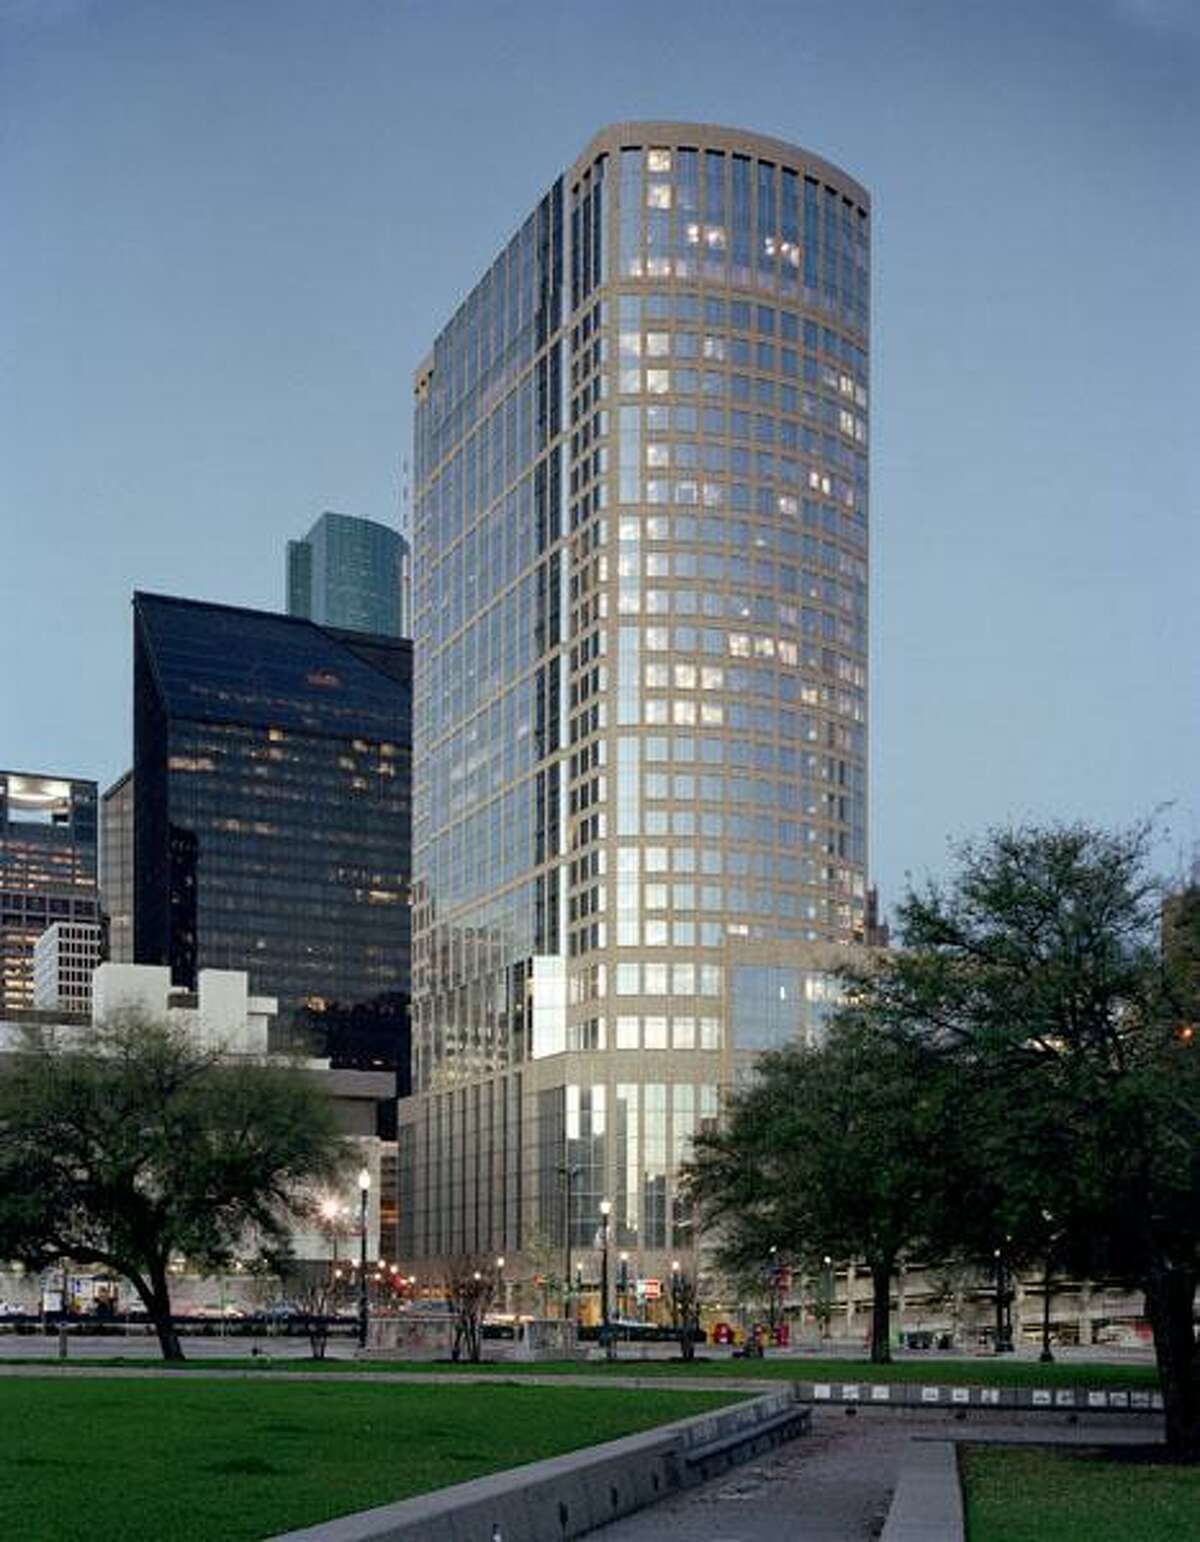 Hines is renovating the lobby at 717 Texas, a 33-story building that opened in 2013. Calpine recently renewed its lease in the building.